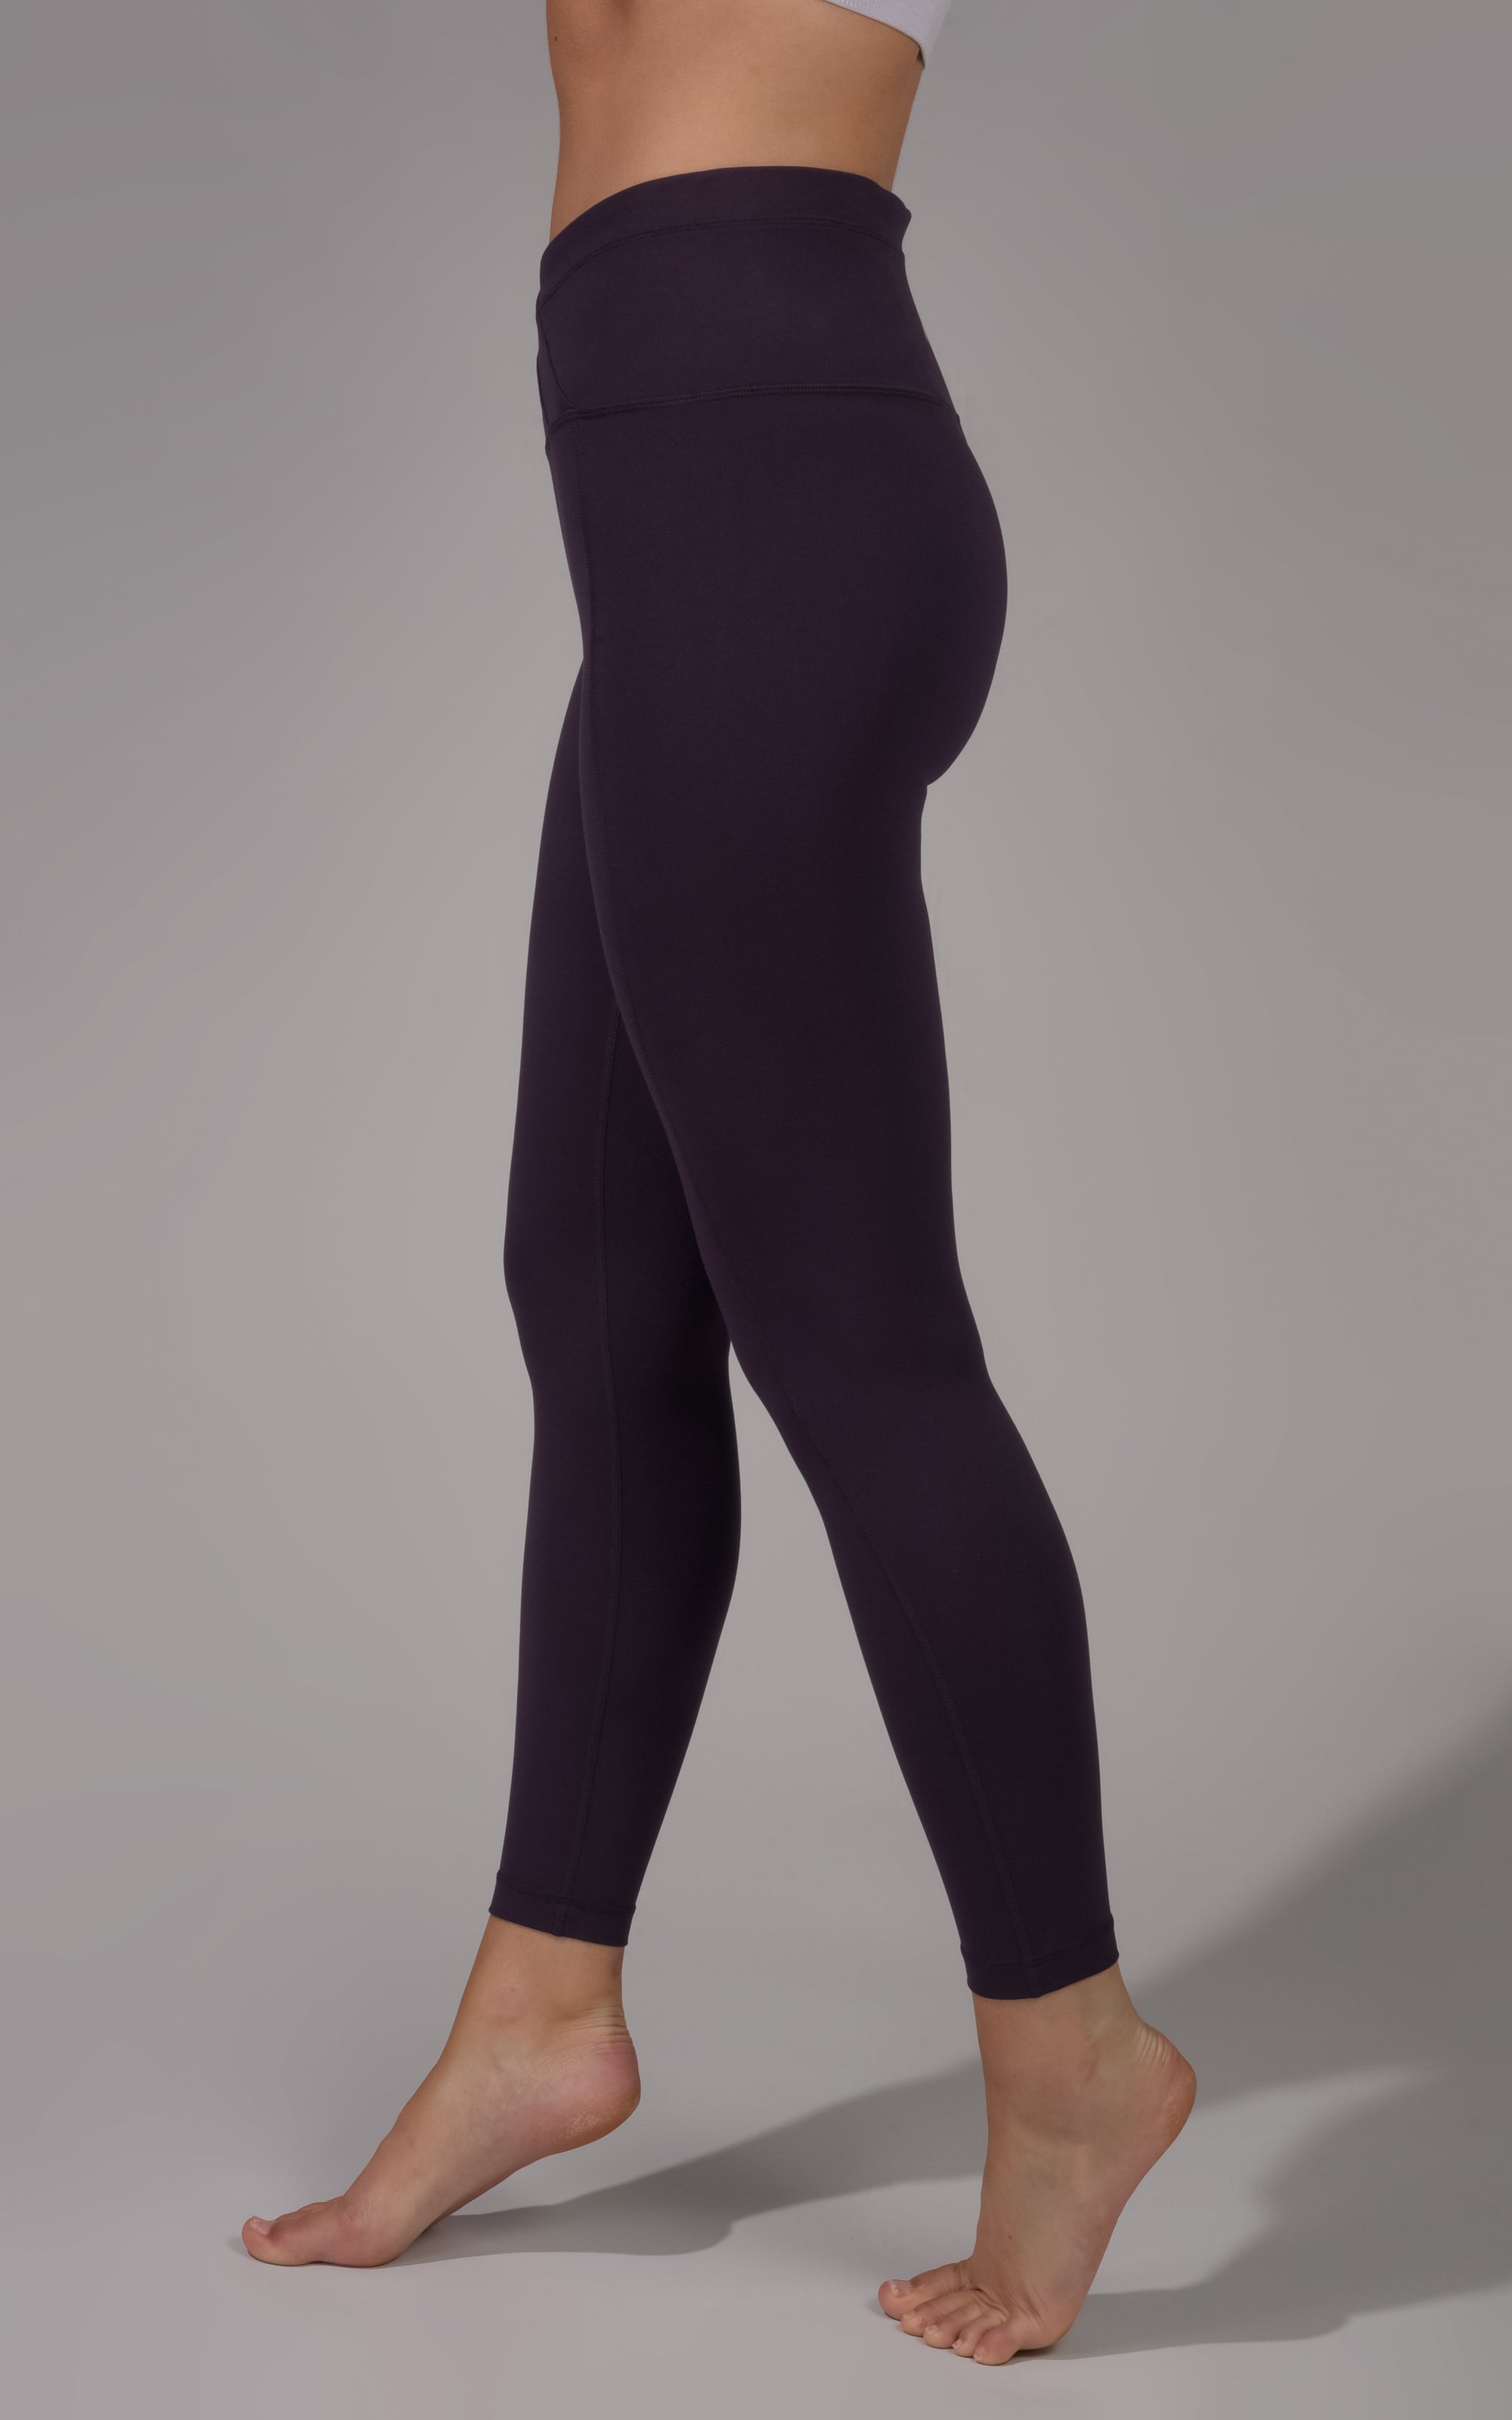 Yogalicious Lux High Waist 7/8 Ankle Legging with Front Criss